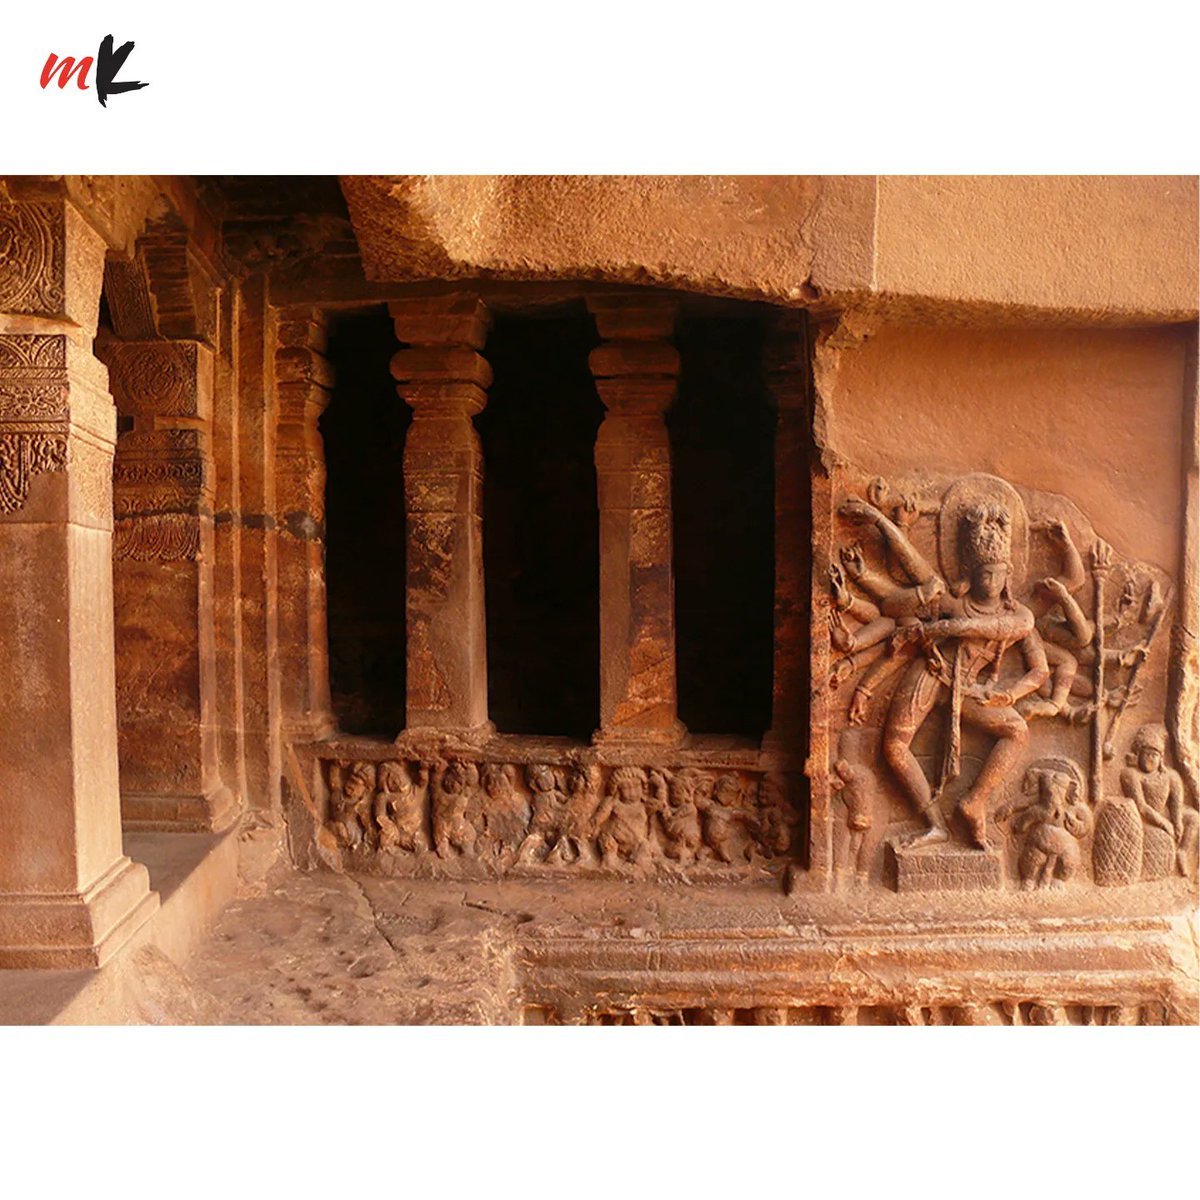 Rock cut cave temples, hilltop forts and prehistoric remains at Karnataka's Badami testify a piece of glorious history. Take a virtual tour of the hill fort & make your travel plans.

Know more: telegraphindia.com/my-kolkata/pla…

#TravelWithMK #Travel #AncientTemples #Badami #History